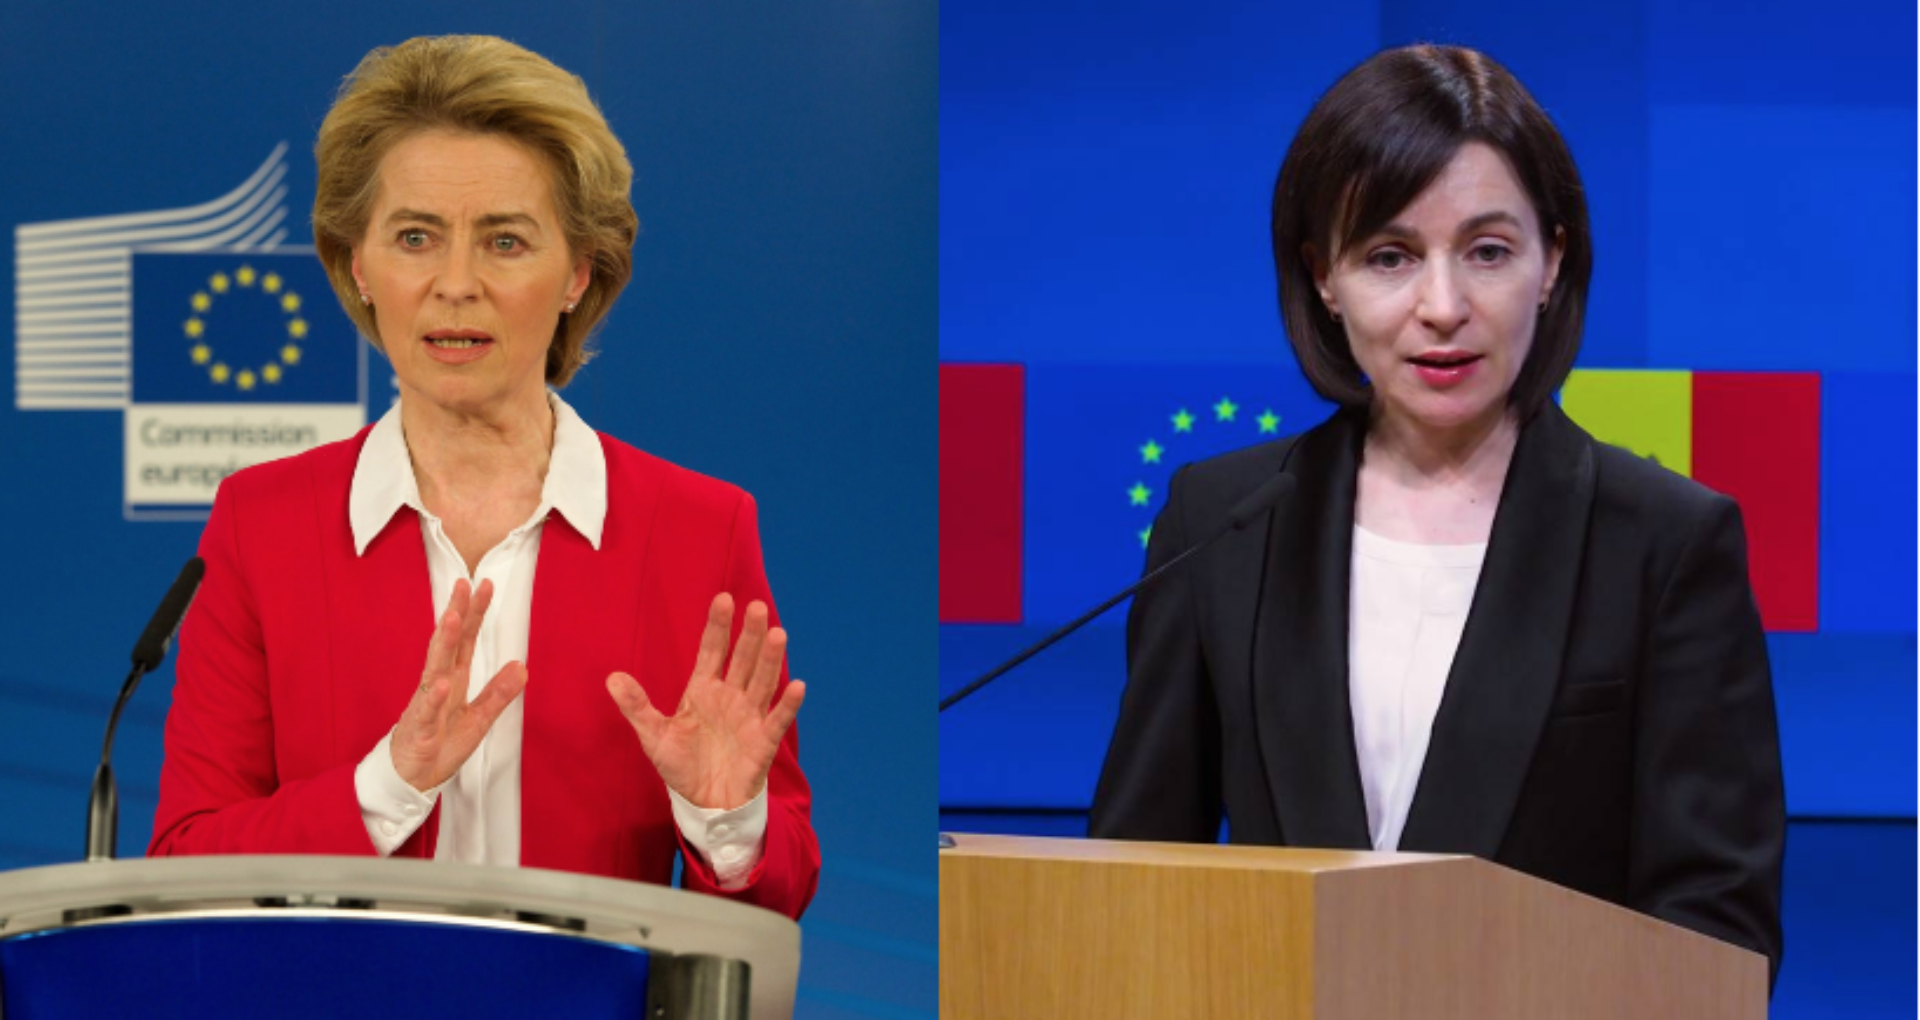 The European Commission President’s Message to the President-elect, Maia Sandu